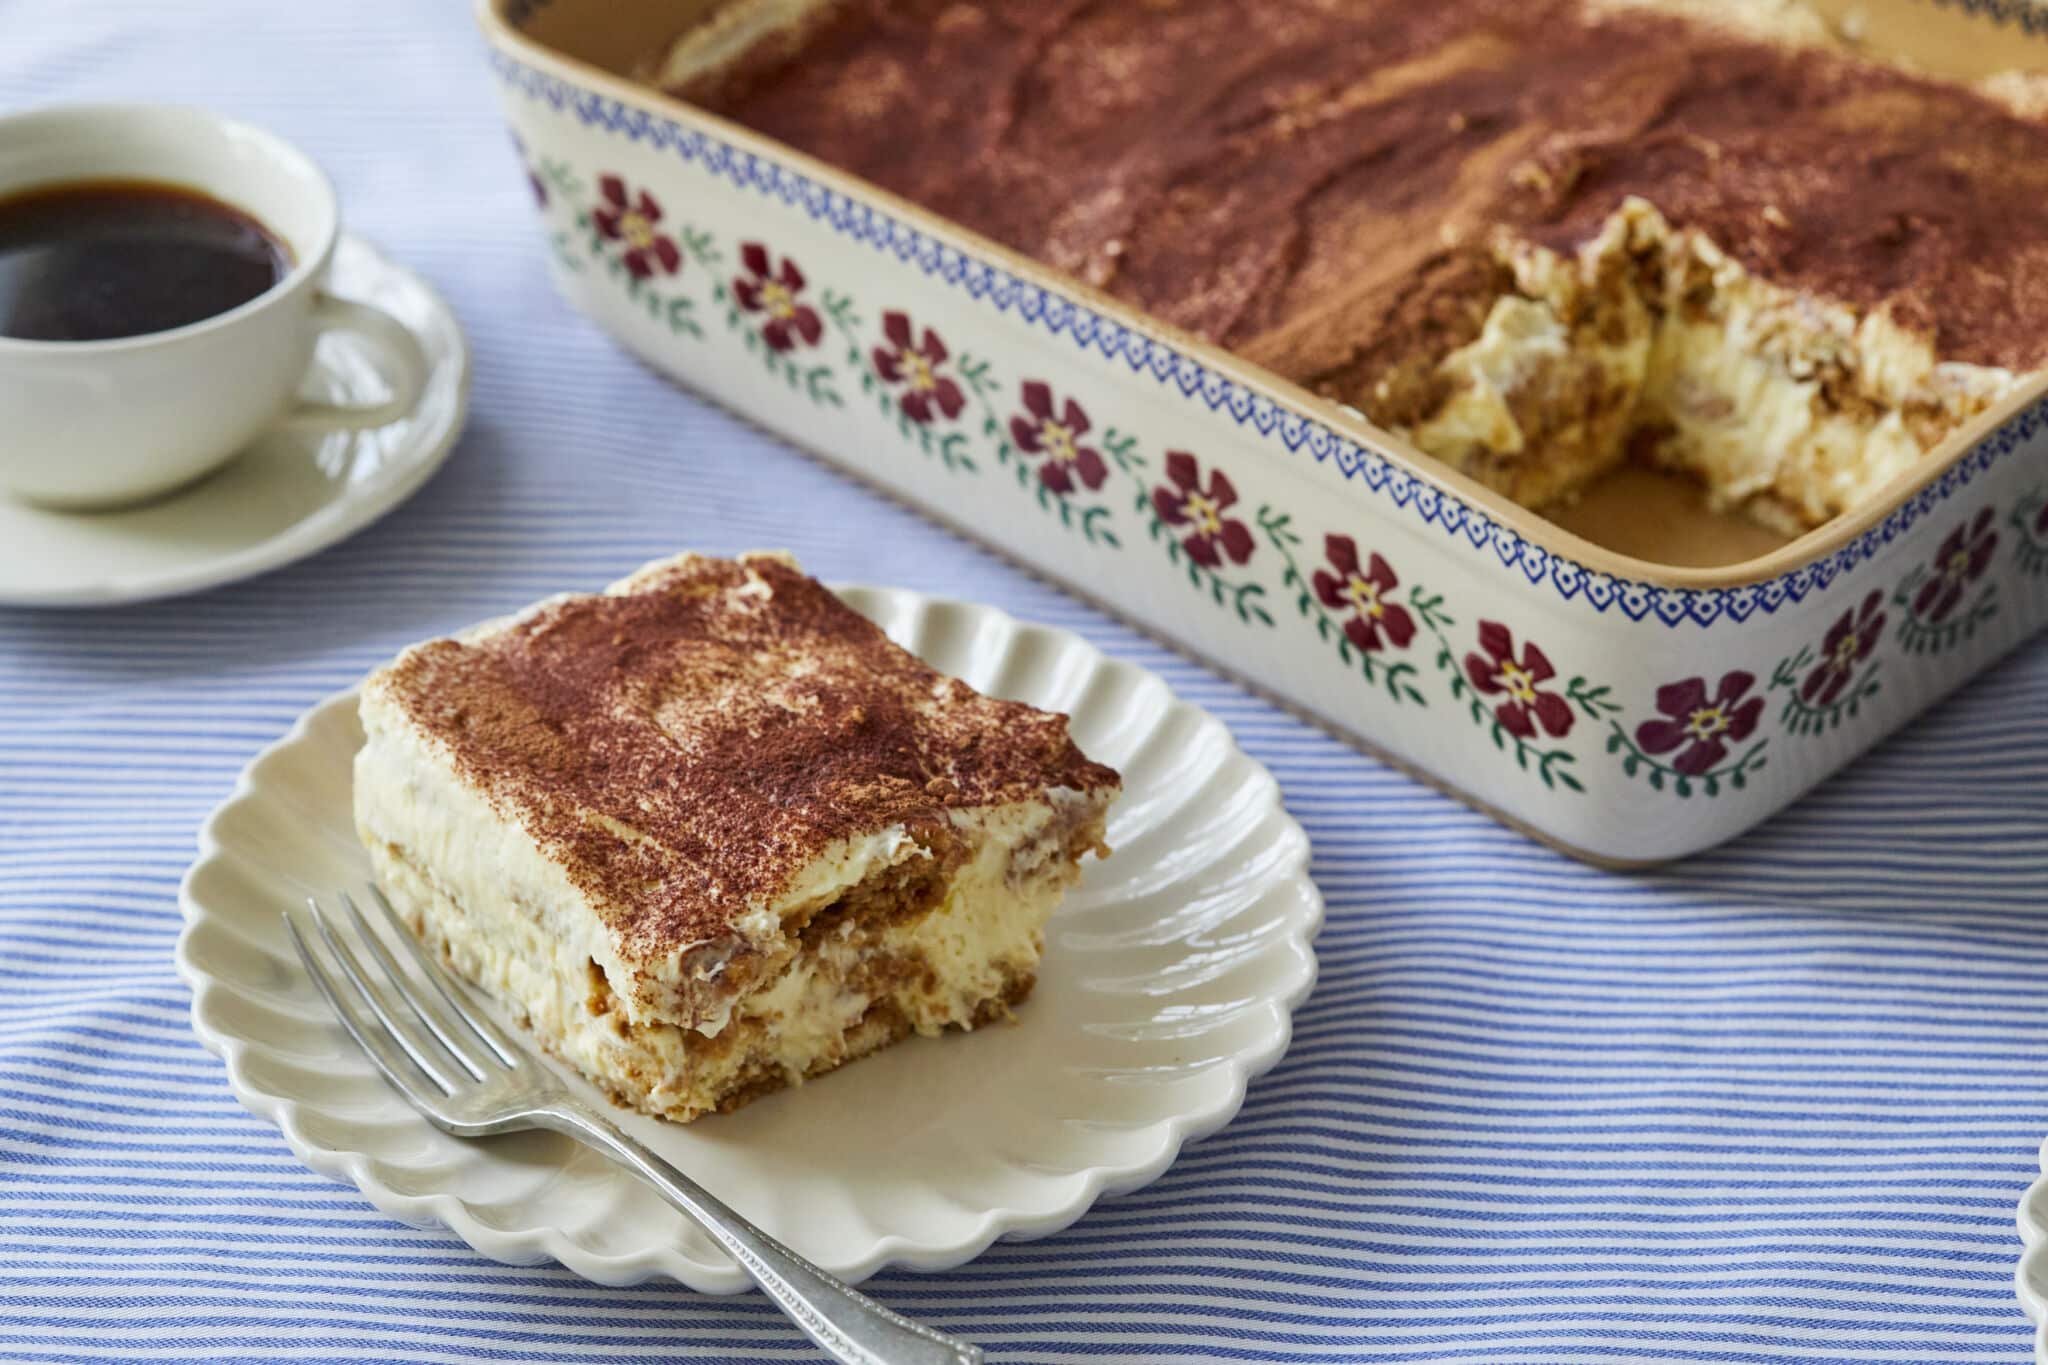 Single serving of the best Tiramisu recipe and a full serving tray of more to be served along with a cup of coffee